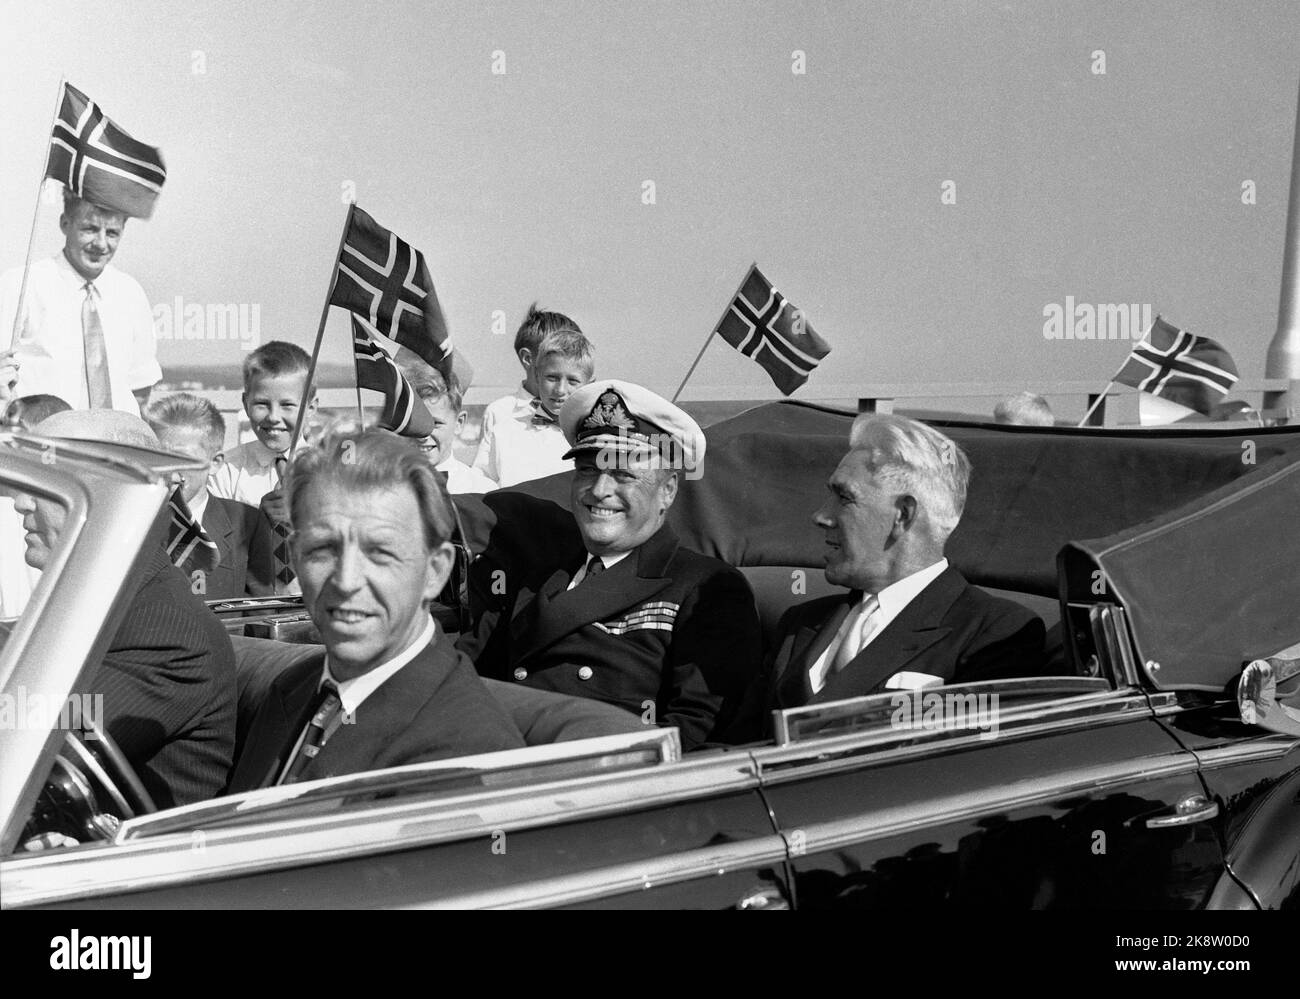 Fredrikstad 19570718 Crown Prince Olav arrives for the opening of the Fredrikstad Bridge,- bridge over Glomma between Østre and Vestre Fredrikstad. A smiling crown prince in uniform in a car, flag in the background. Photo: Jan Nordby / NTB / NTB Stock Photo